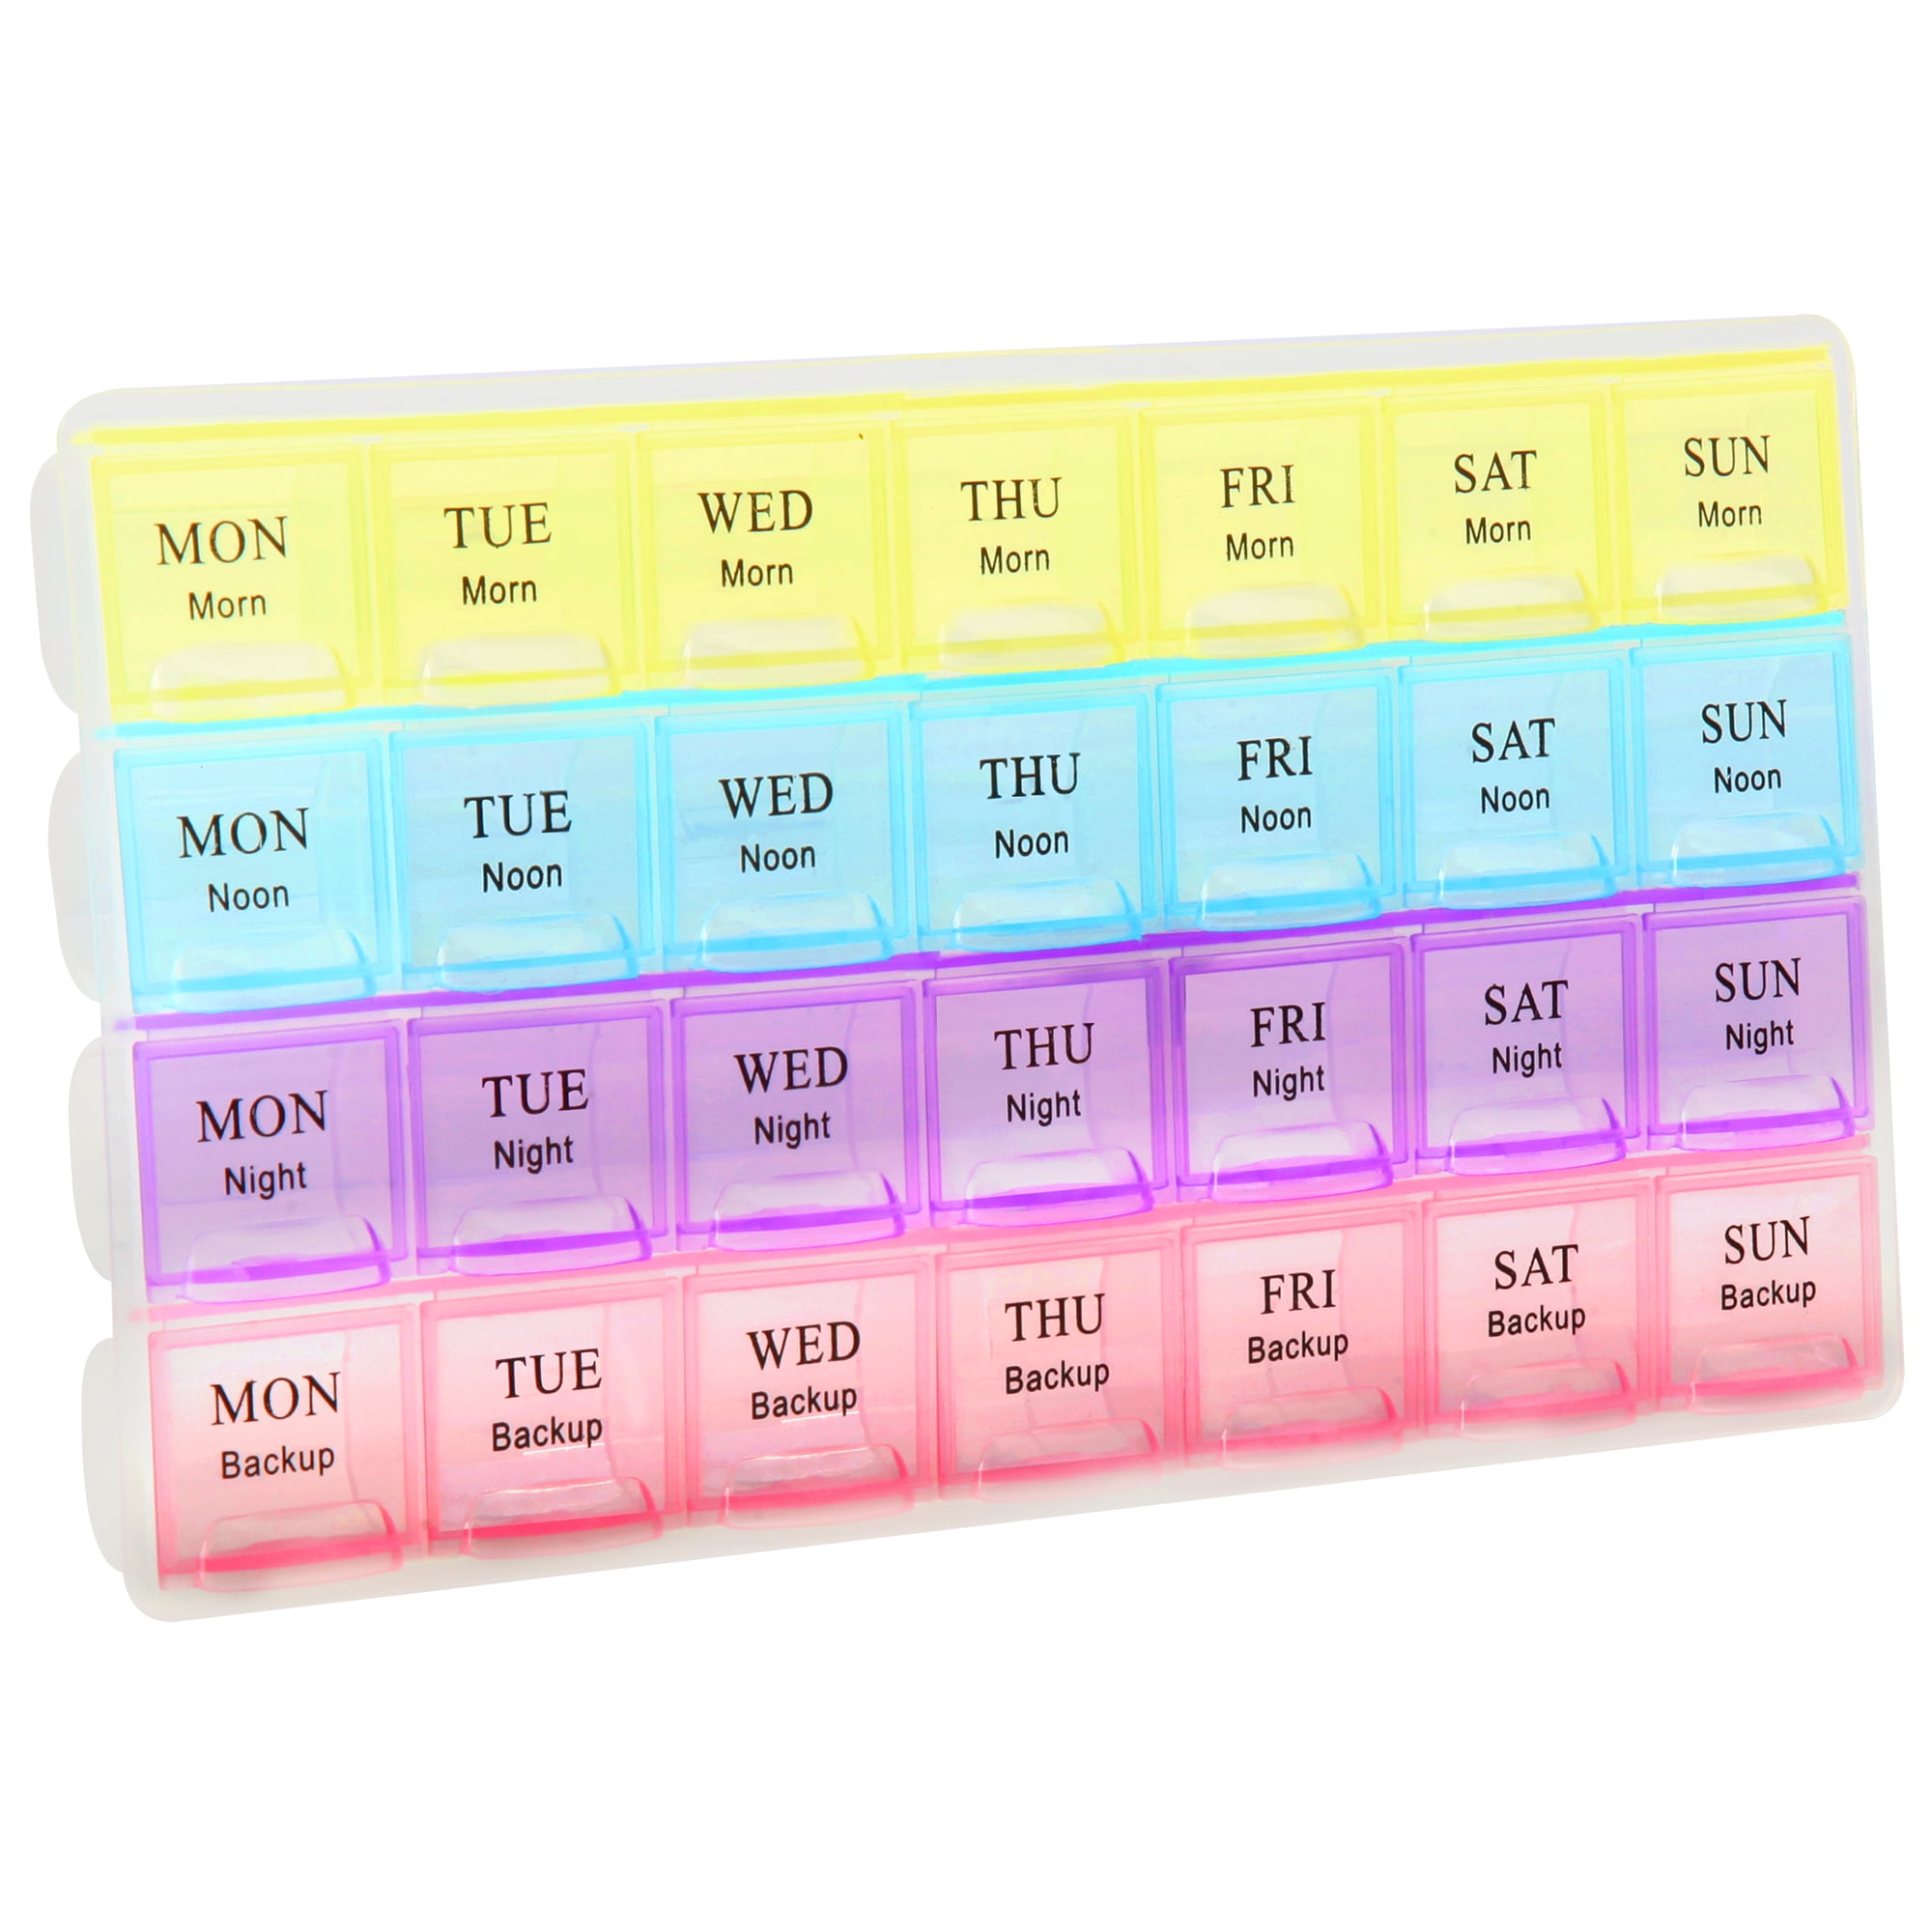 Anself Portable Pill Organizer Storage Box Weekly Prescription and Medication Case 7 Days 4 Times A Day Morning Noon Afternoon Night 28 Slots